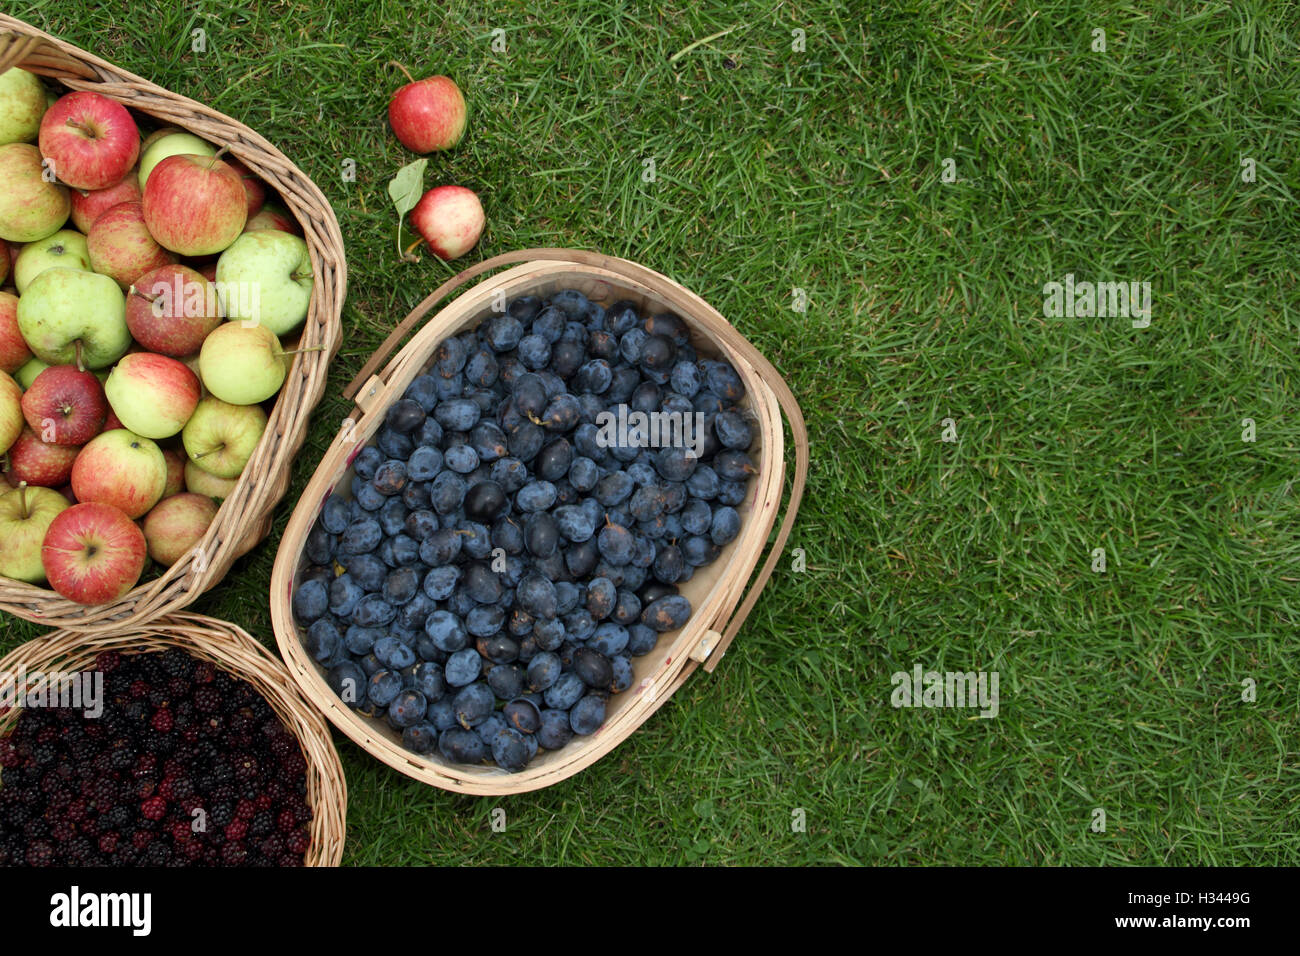 Baskets filled with foraged blackberries, apples and damsons picked in the English countryside during autumn, UK  - copy space Stock Photo